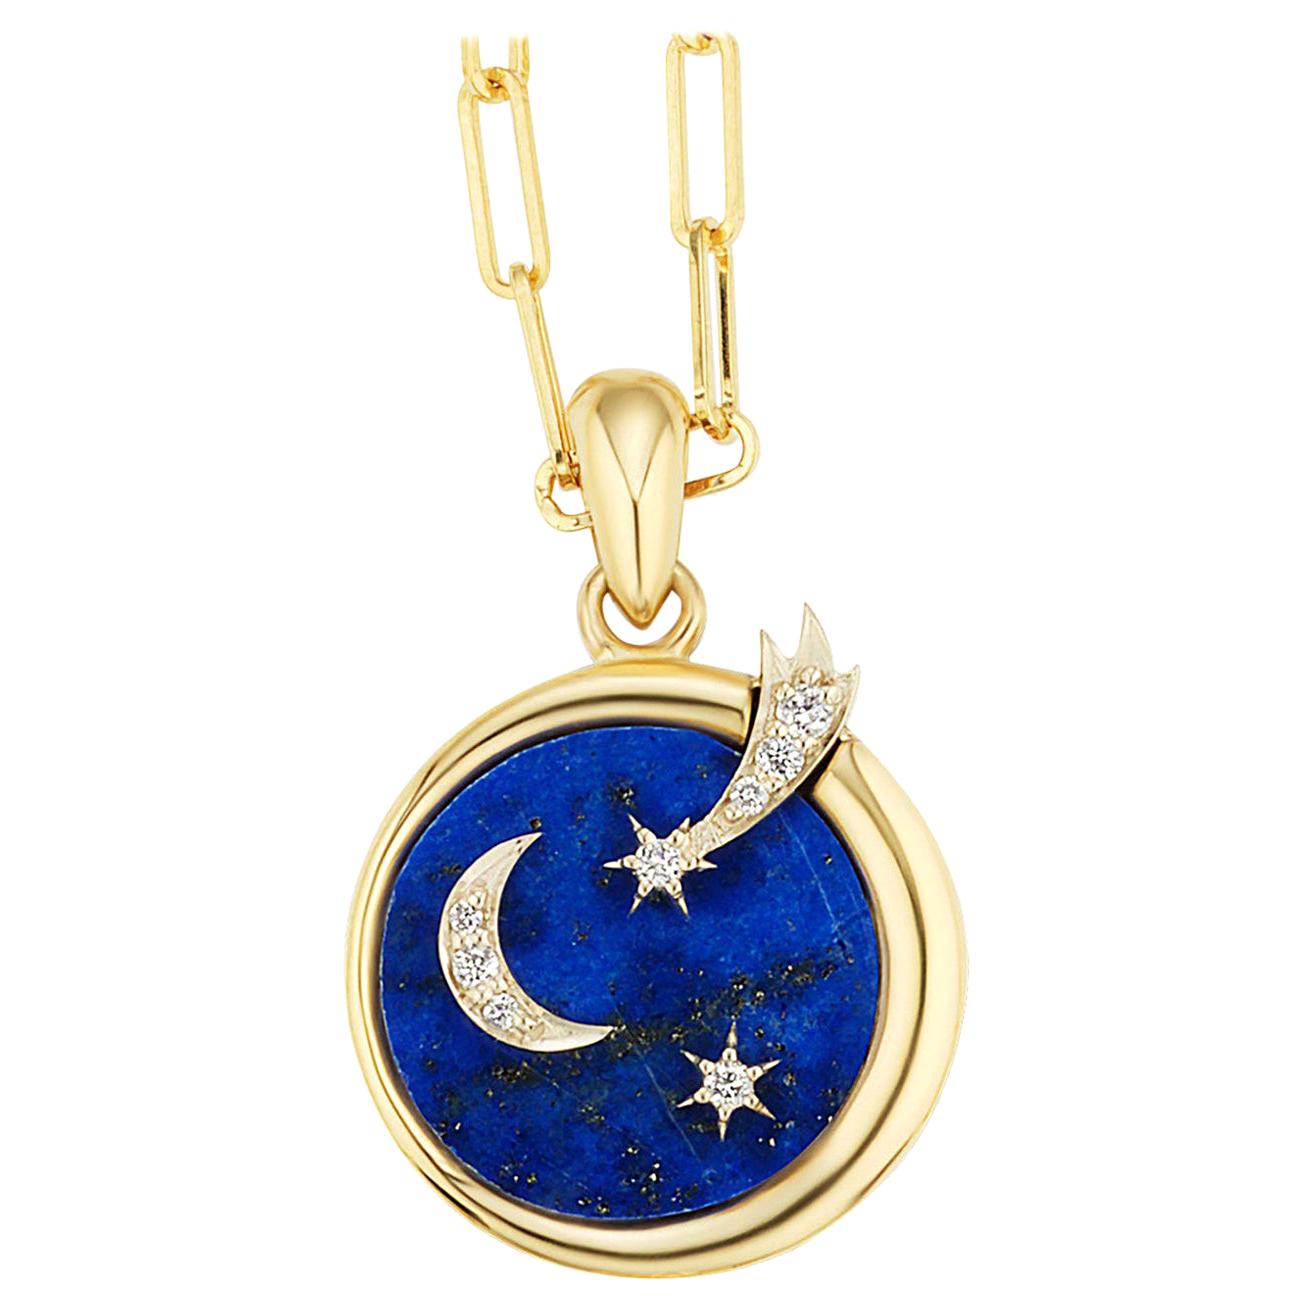 AnaKatarina Elements 'Air' Pendant in 18 Karat Gold, Chilean Lapis, and Diamonds For Sale